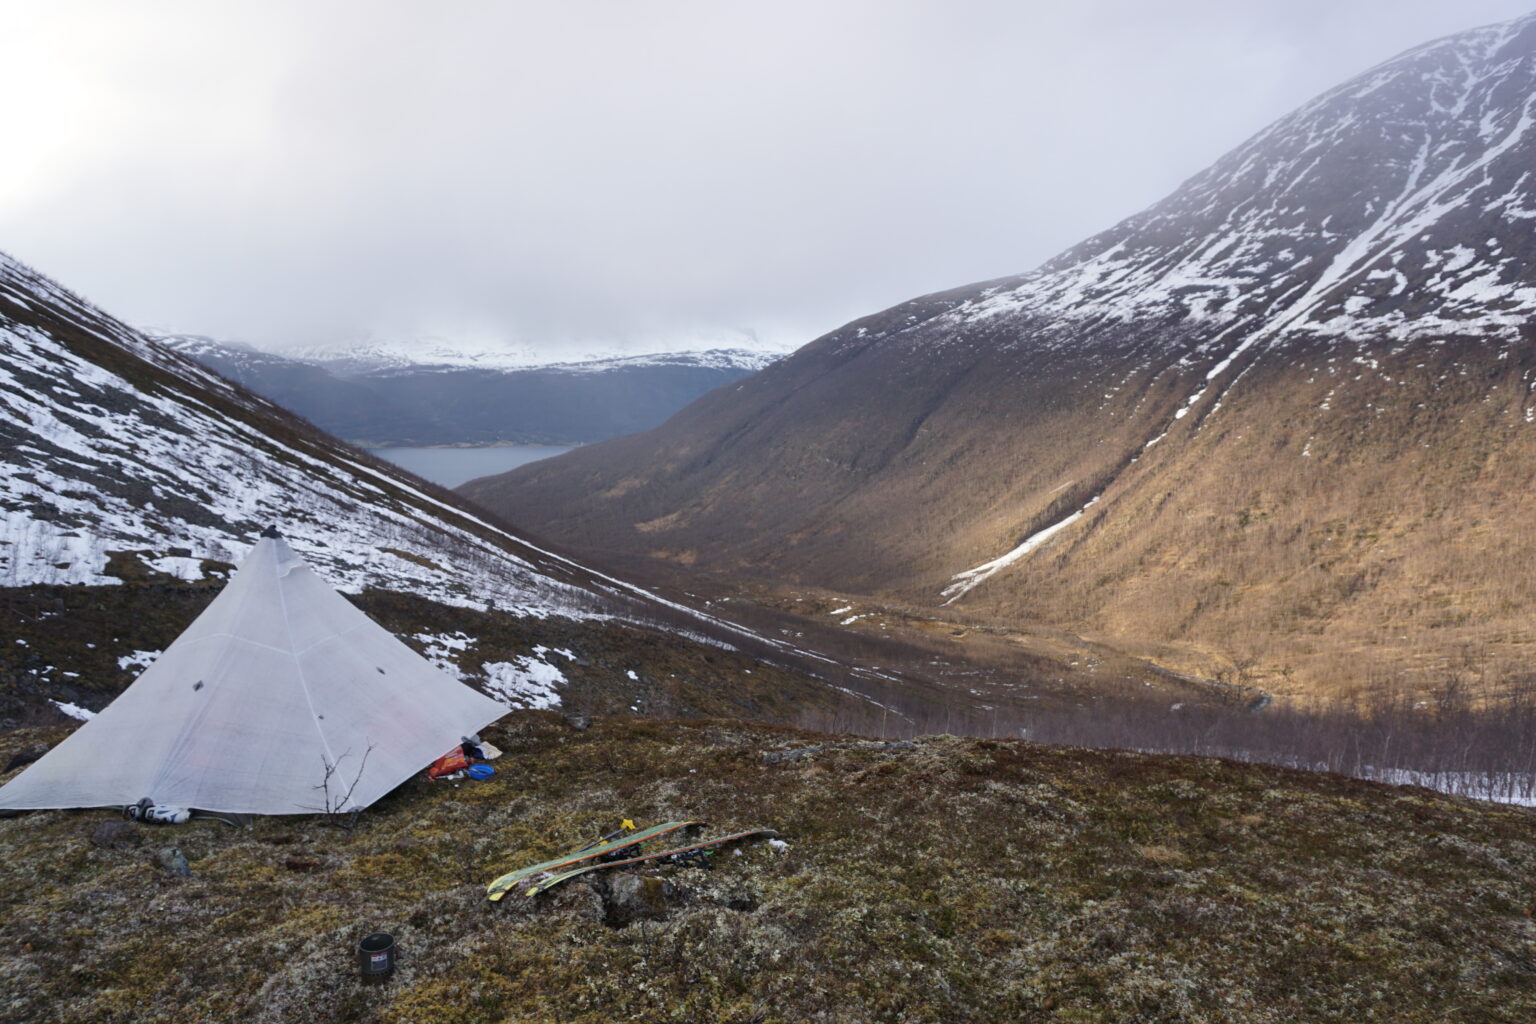 Setting up camp with a view of the Lyngen Fjord